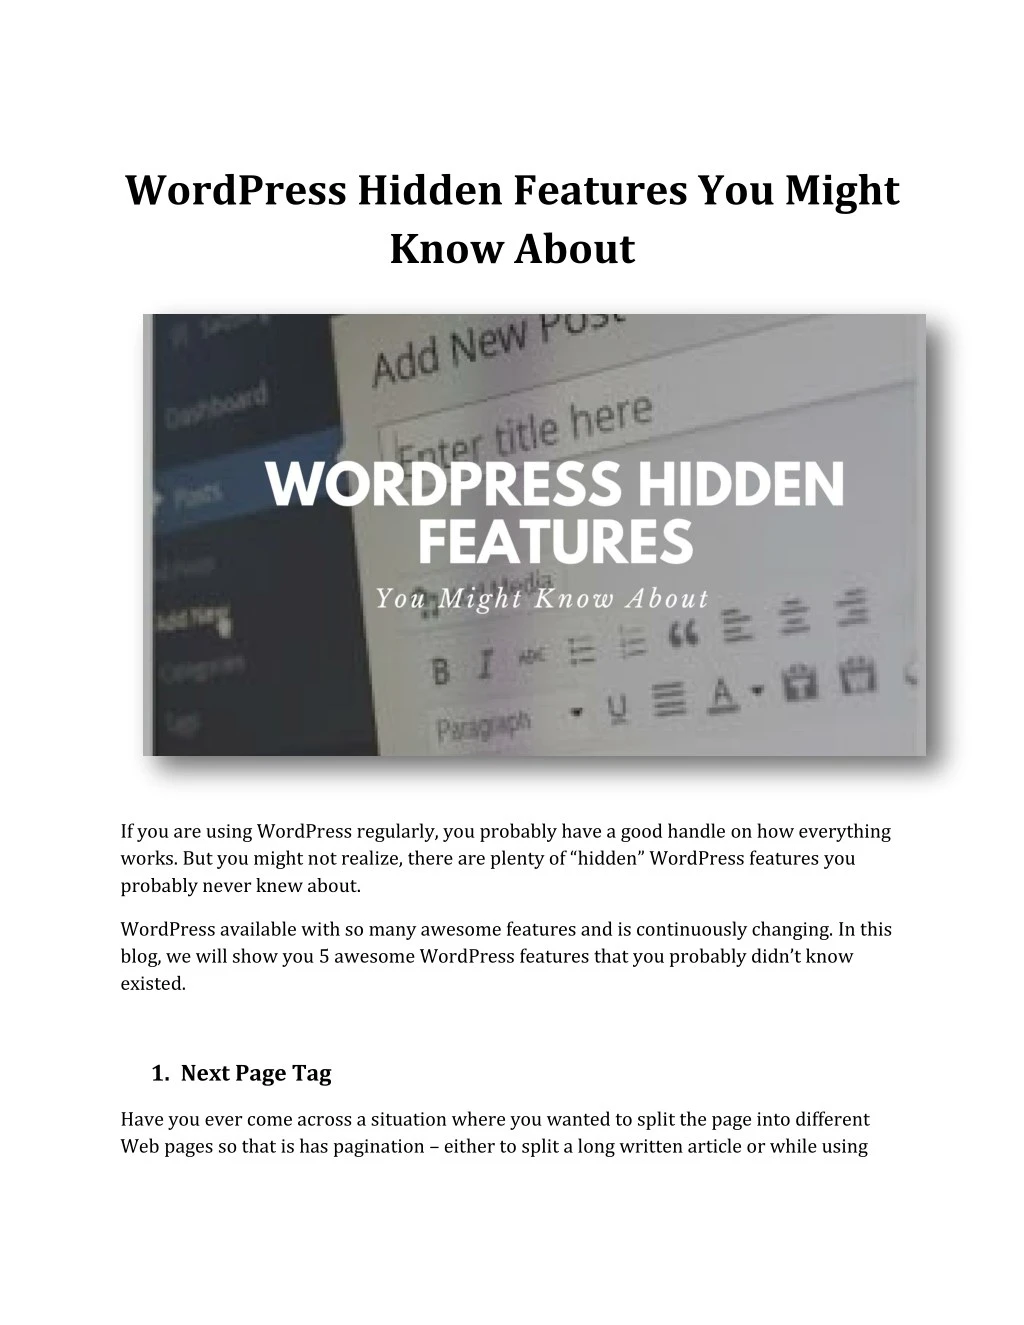 wordpress hidden features you might know about